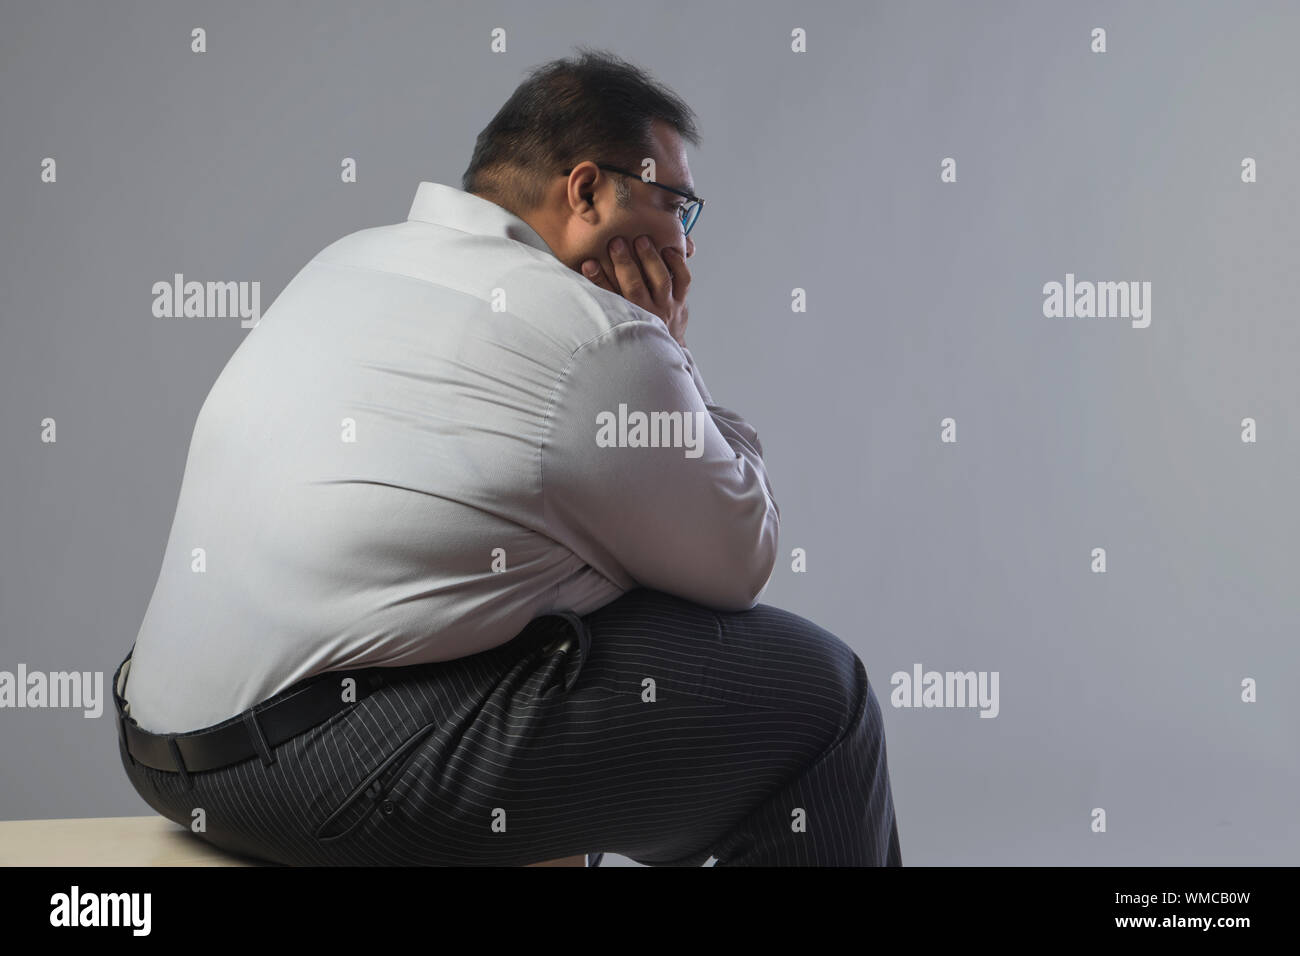 Side view of obese man sitting in sad mood with chin resting on hand Stock Photo